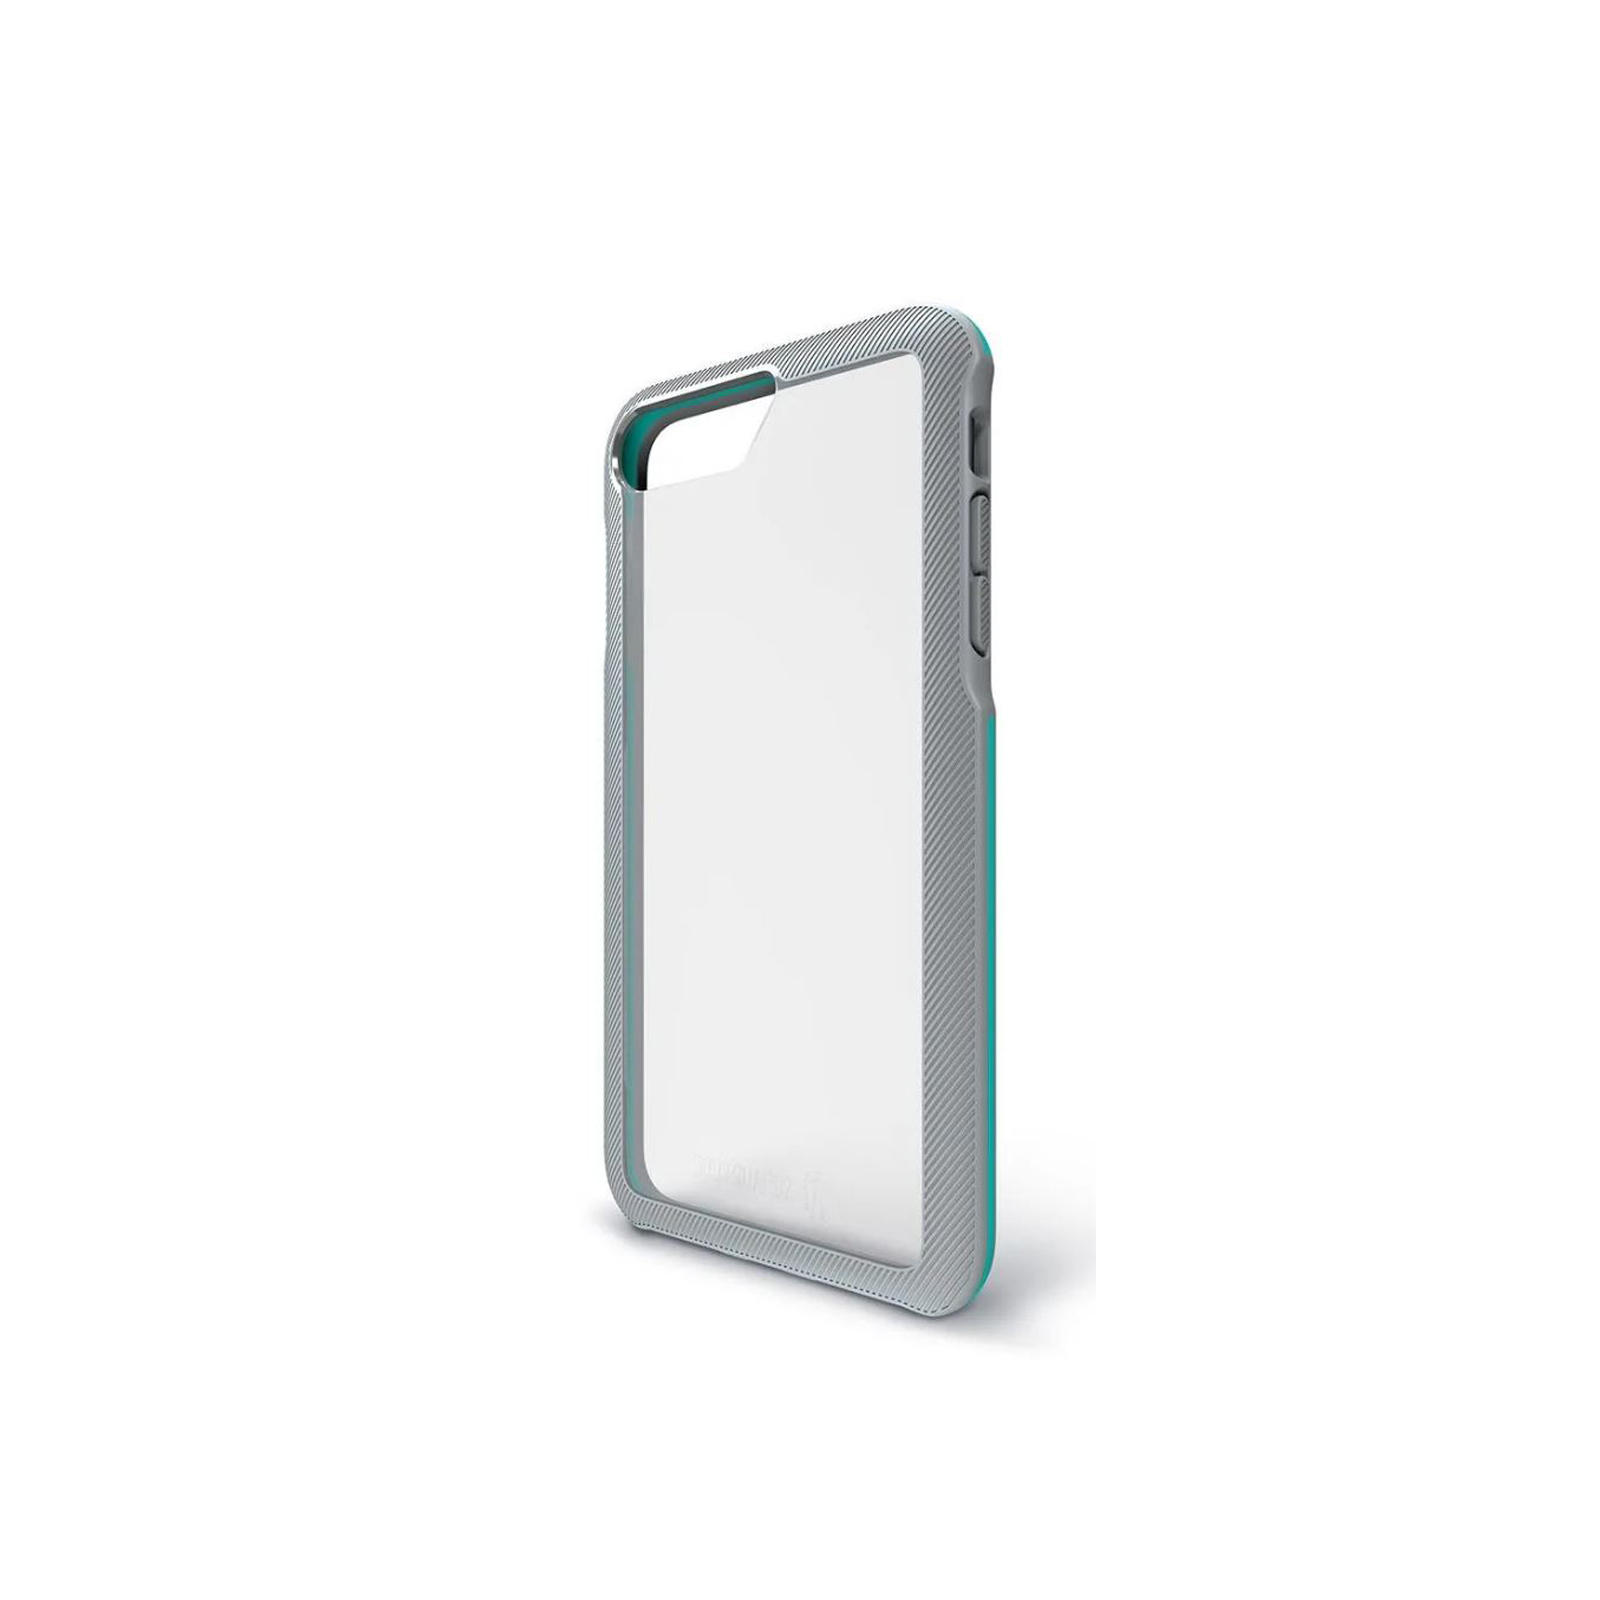 Trainr iPhone 6 / 7 / 8 Case [Gray / Mint]